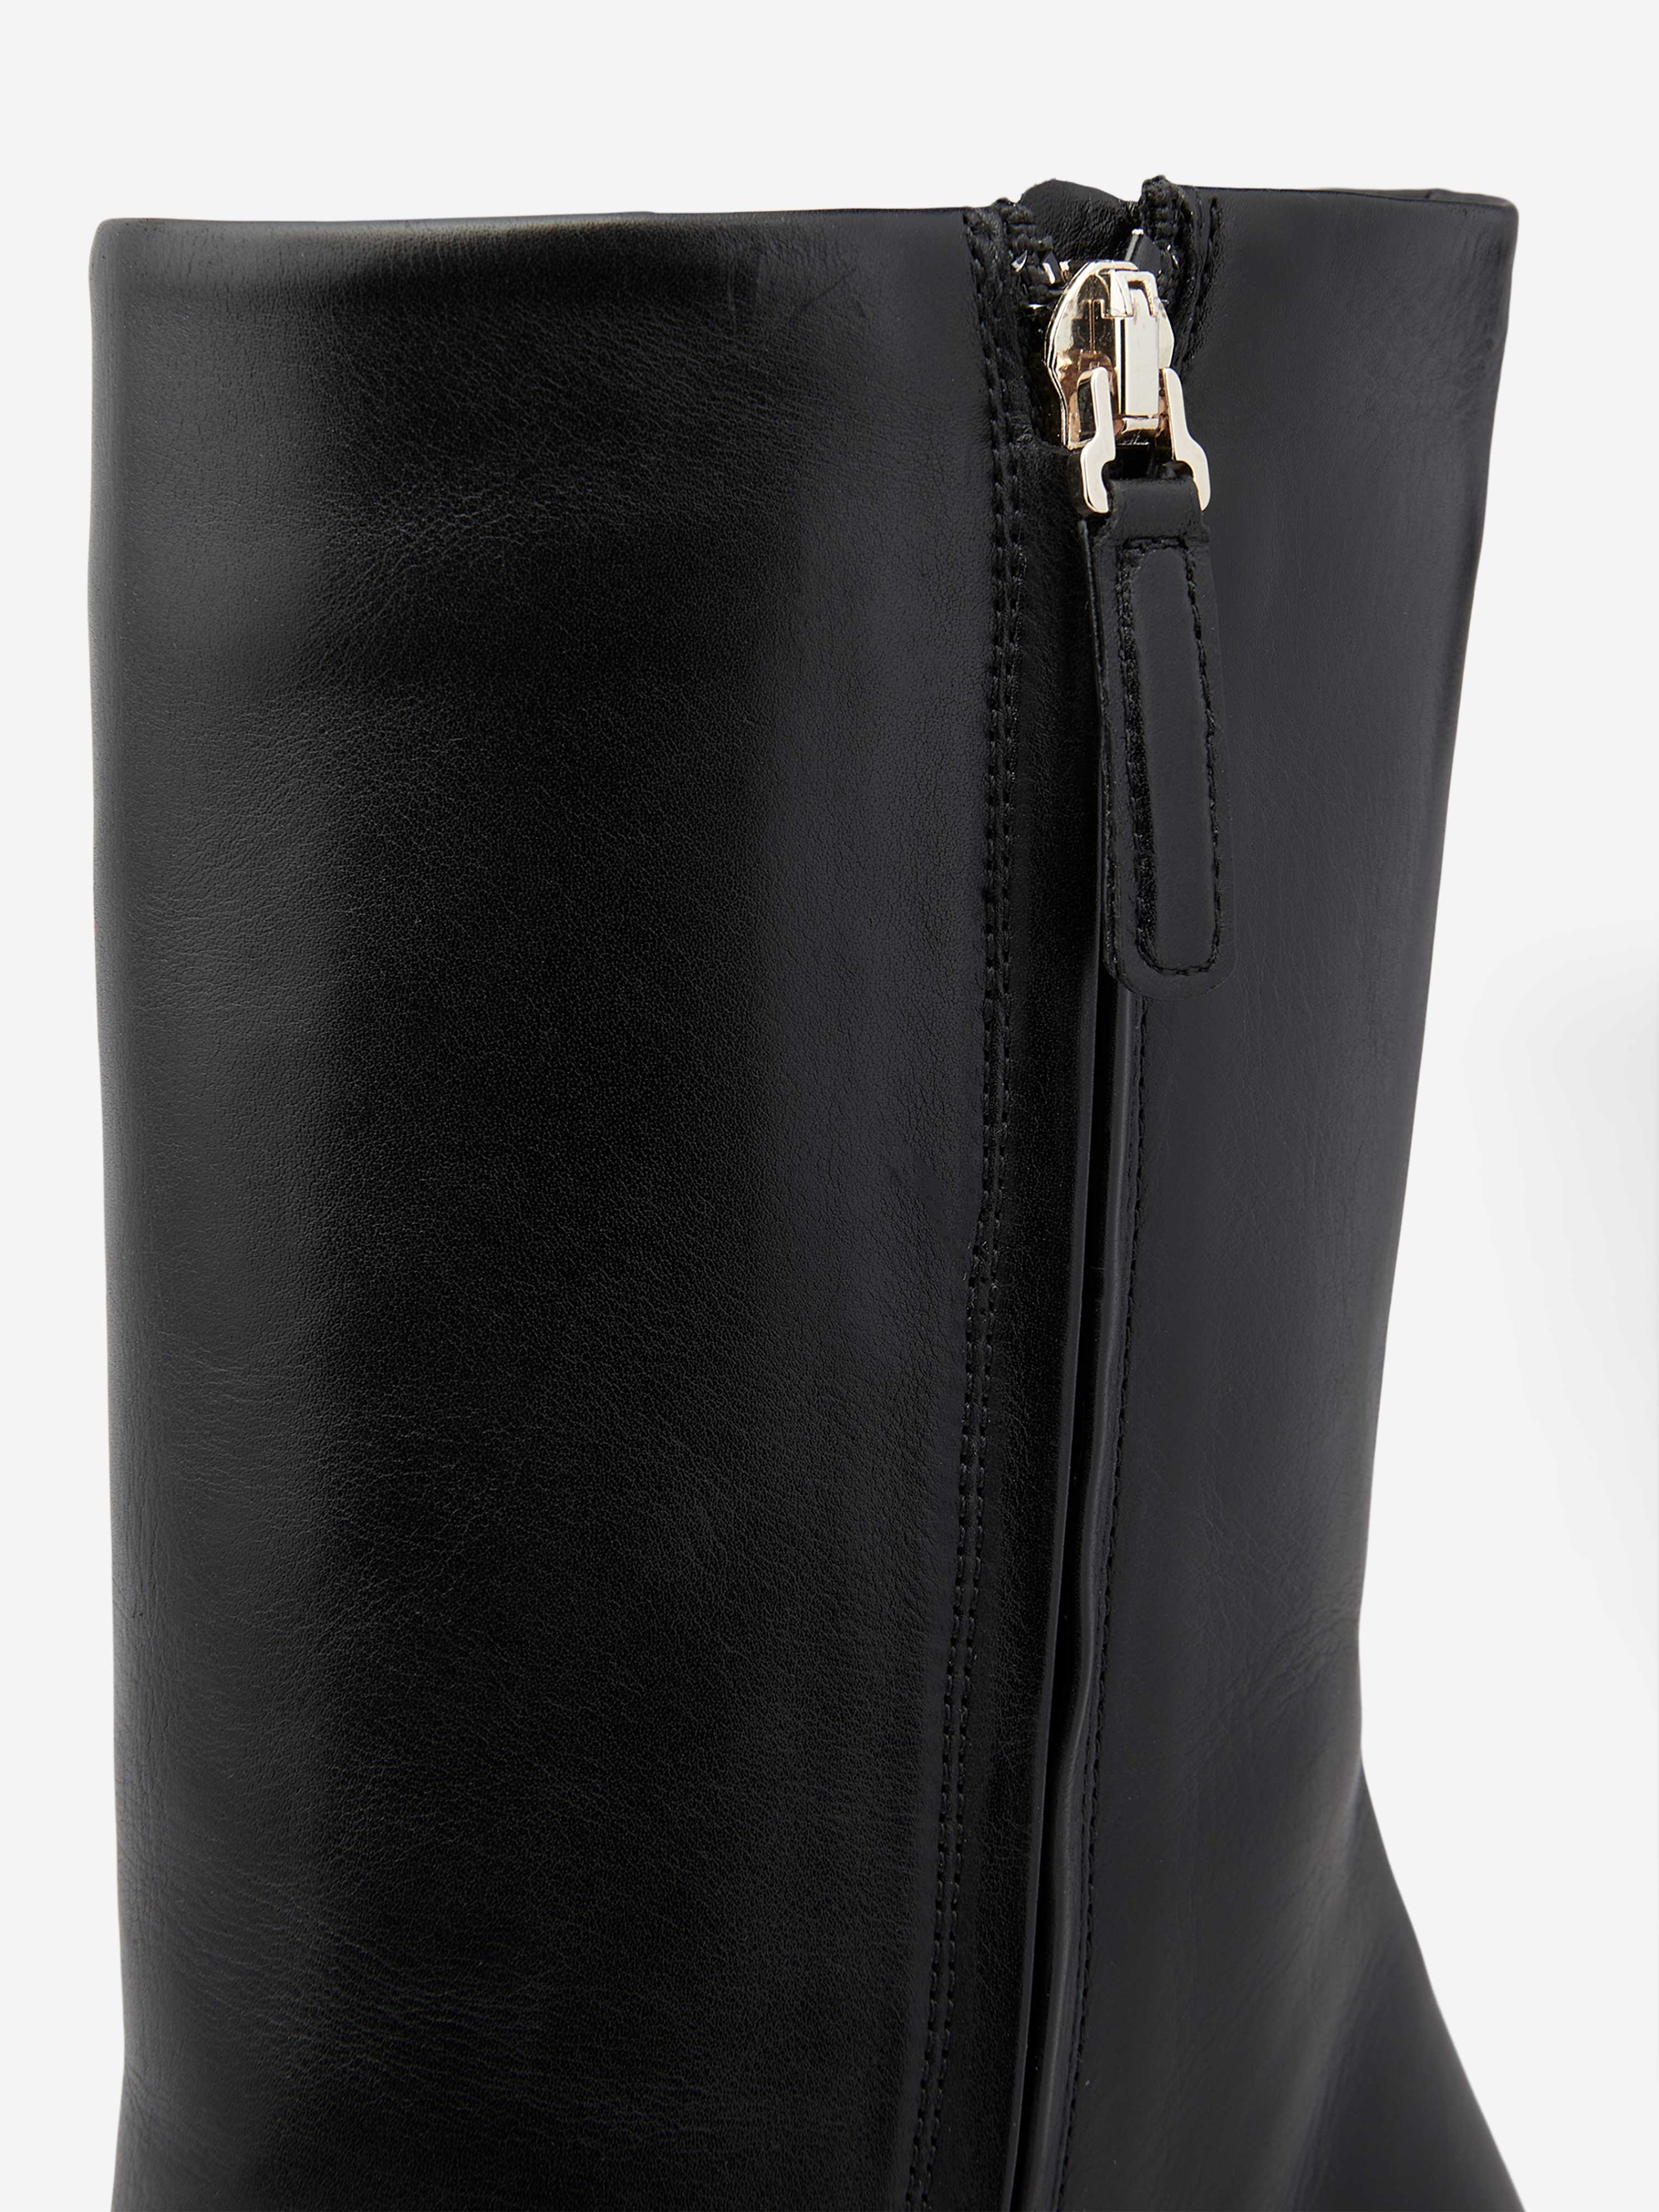 Tamara Mellon Launches Wide-Calf Boots With Innovative New Sizing